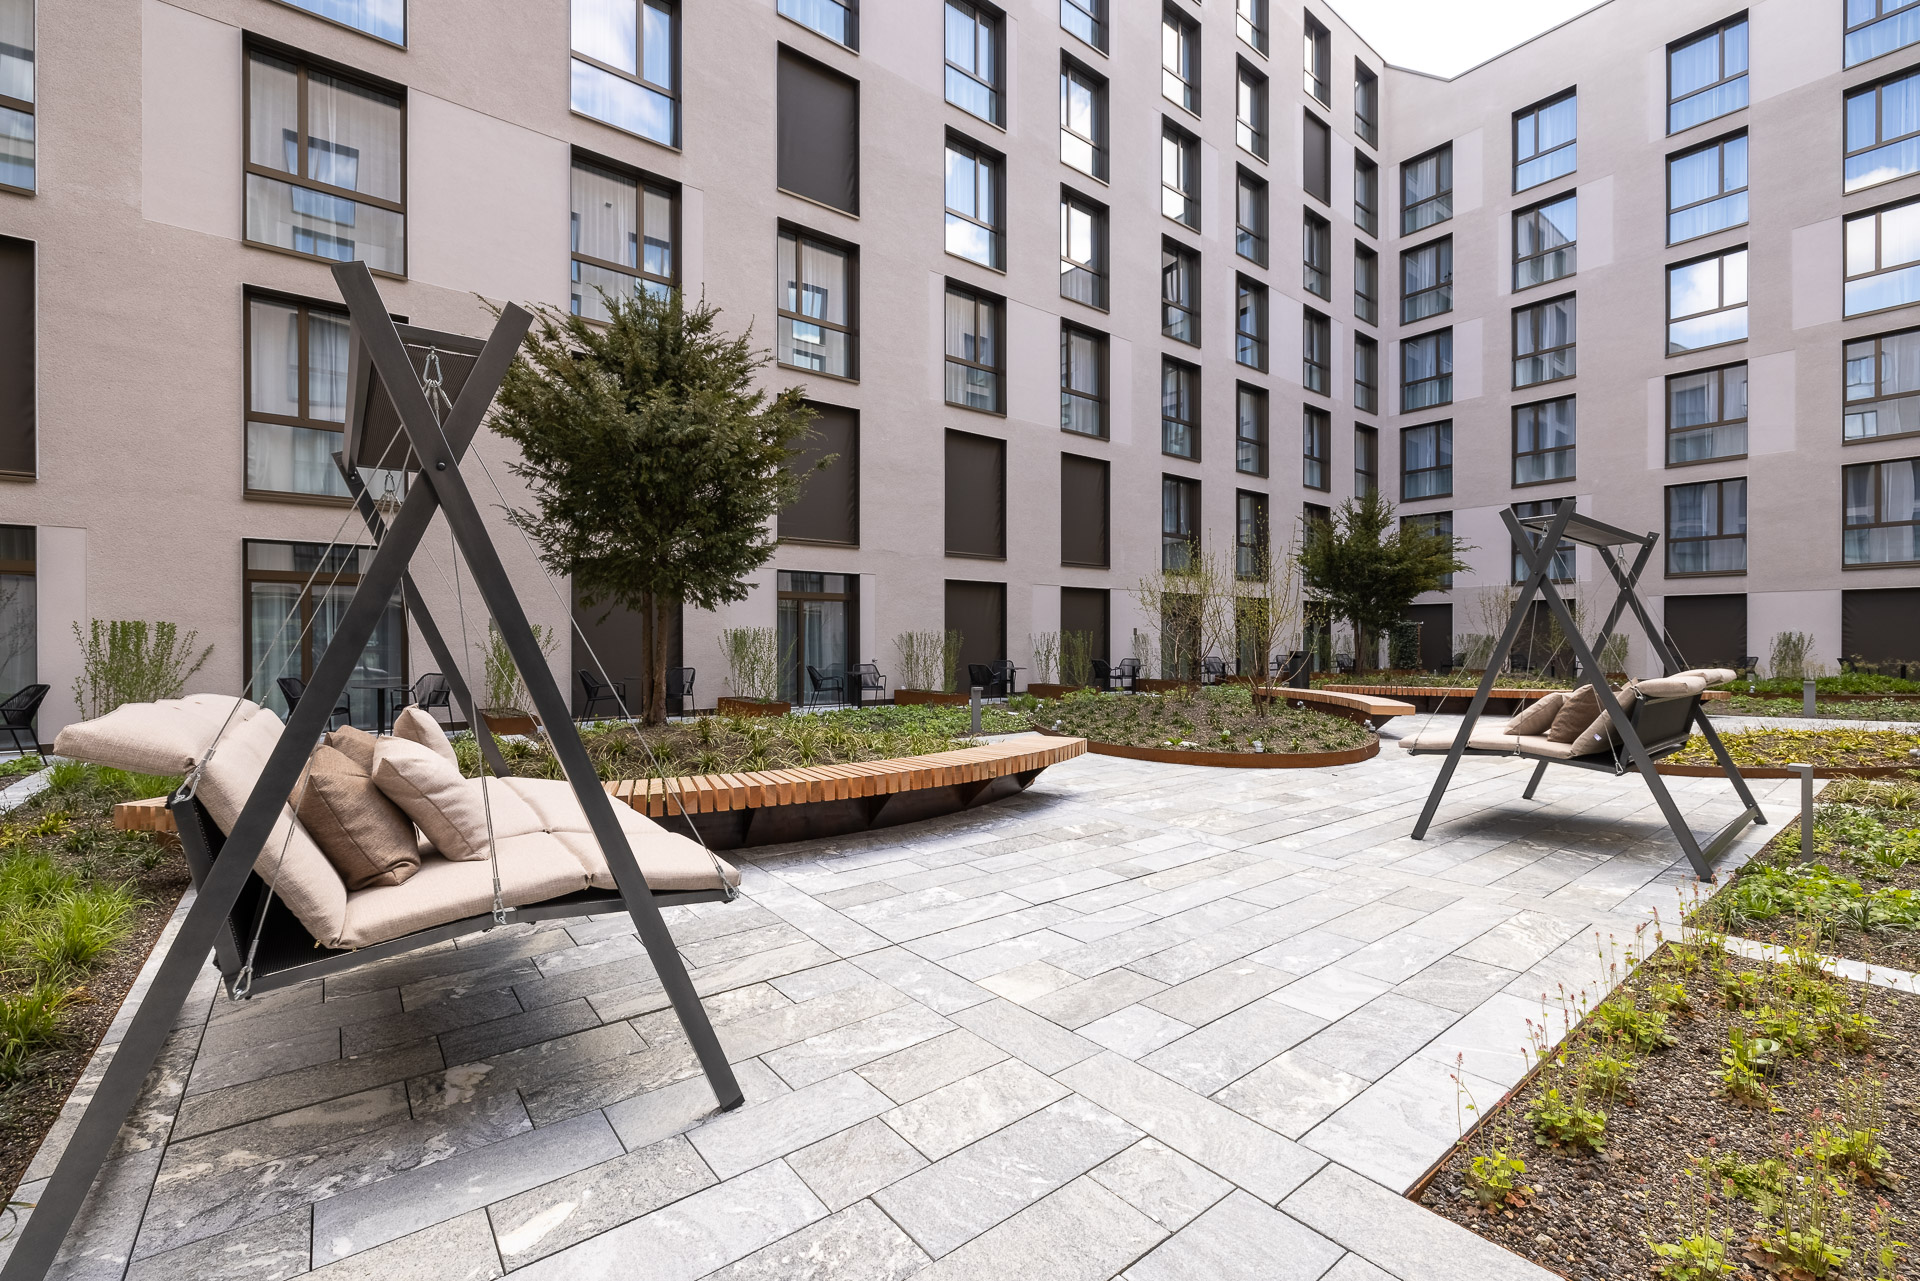 The beautifully landscaped courtyard with some plants and comfortable swings at JOYN Zurich.